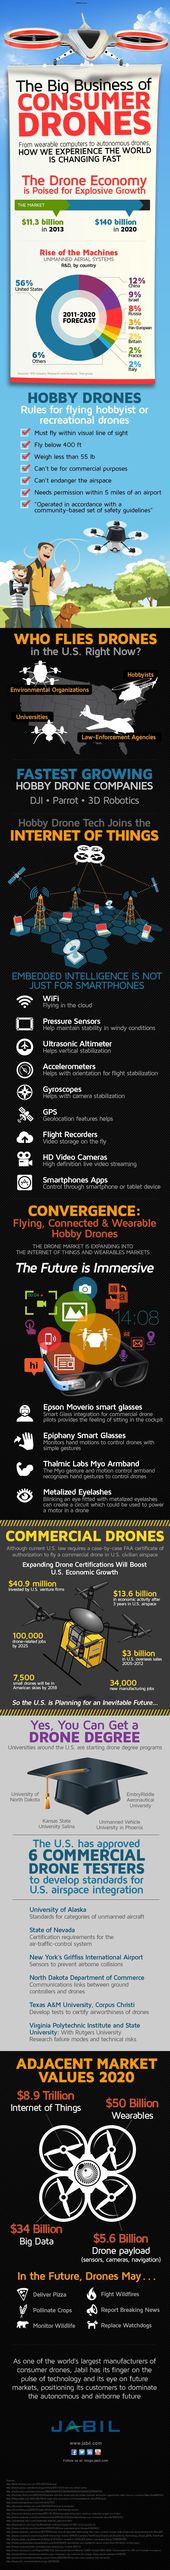 CloudTweaks | Infographic - The Drone Consumer Revolution